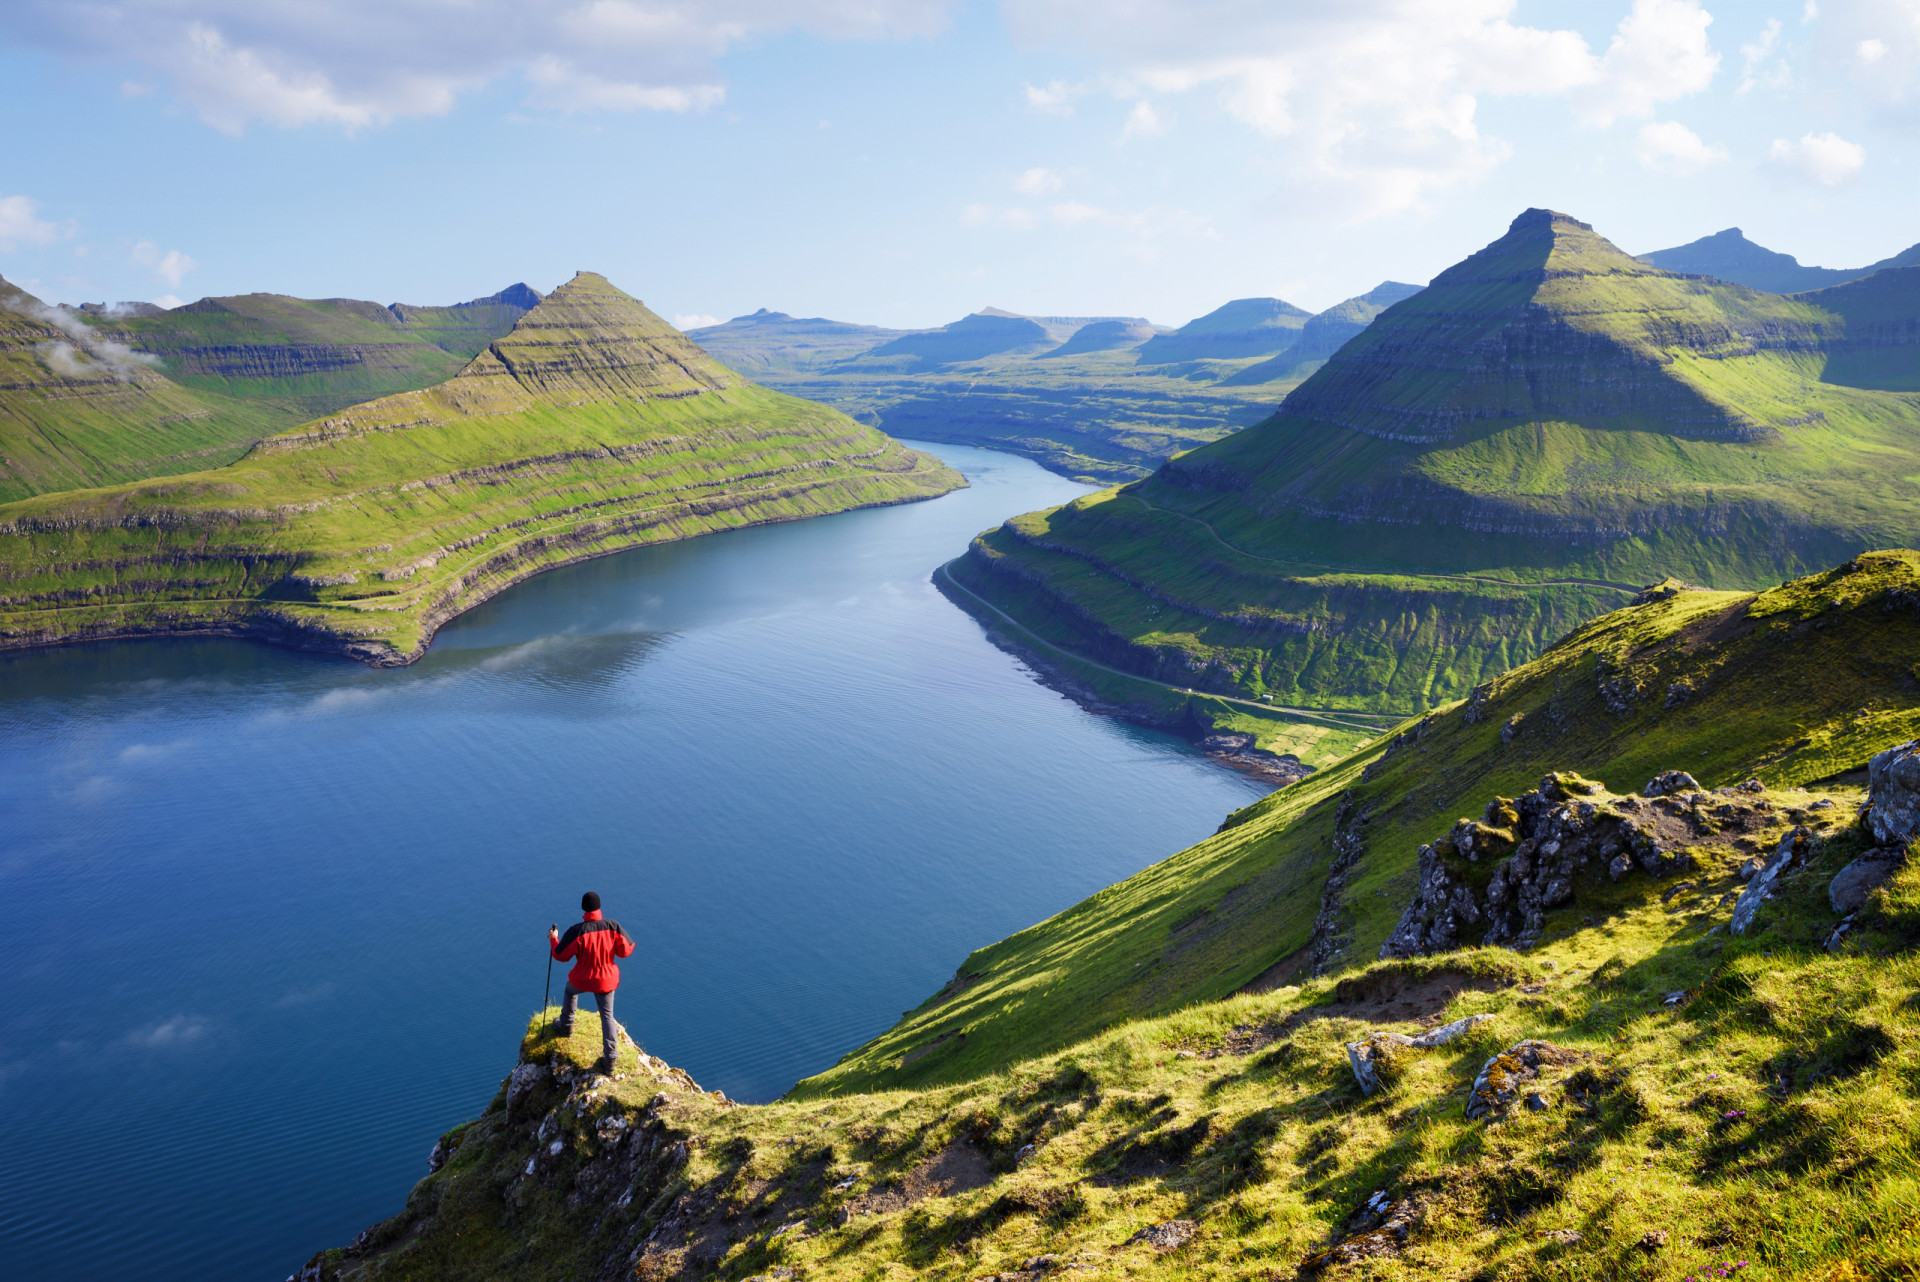 <p>Not a vacation destination that immediately springs to mind, the Faroe Islands are nonetheless a world-class adventure tourism hotspot. This remote North Atlantic <a href="https://www.starsinsider.com/travel/242638/the-worlds-most-stunning-archipelagos" rel="noopener">archipelago</a> affords some of the most rewarding hiking found in northern Europe. And get this: foodies can enjoy top-tier dining at restaurants such as Roks in Tórshavn, the Faroe Islands' snug capital.</p><p>You may also like:<a href="https://www.starsinsider.com/n/433536?utm_source=msn.com&utm_medium=display&utm_campaign=referral_description&utm_content=636762en-en_selected"> The 30 worst habits when you're stuck at home</a></p>